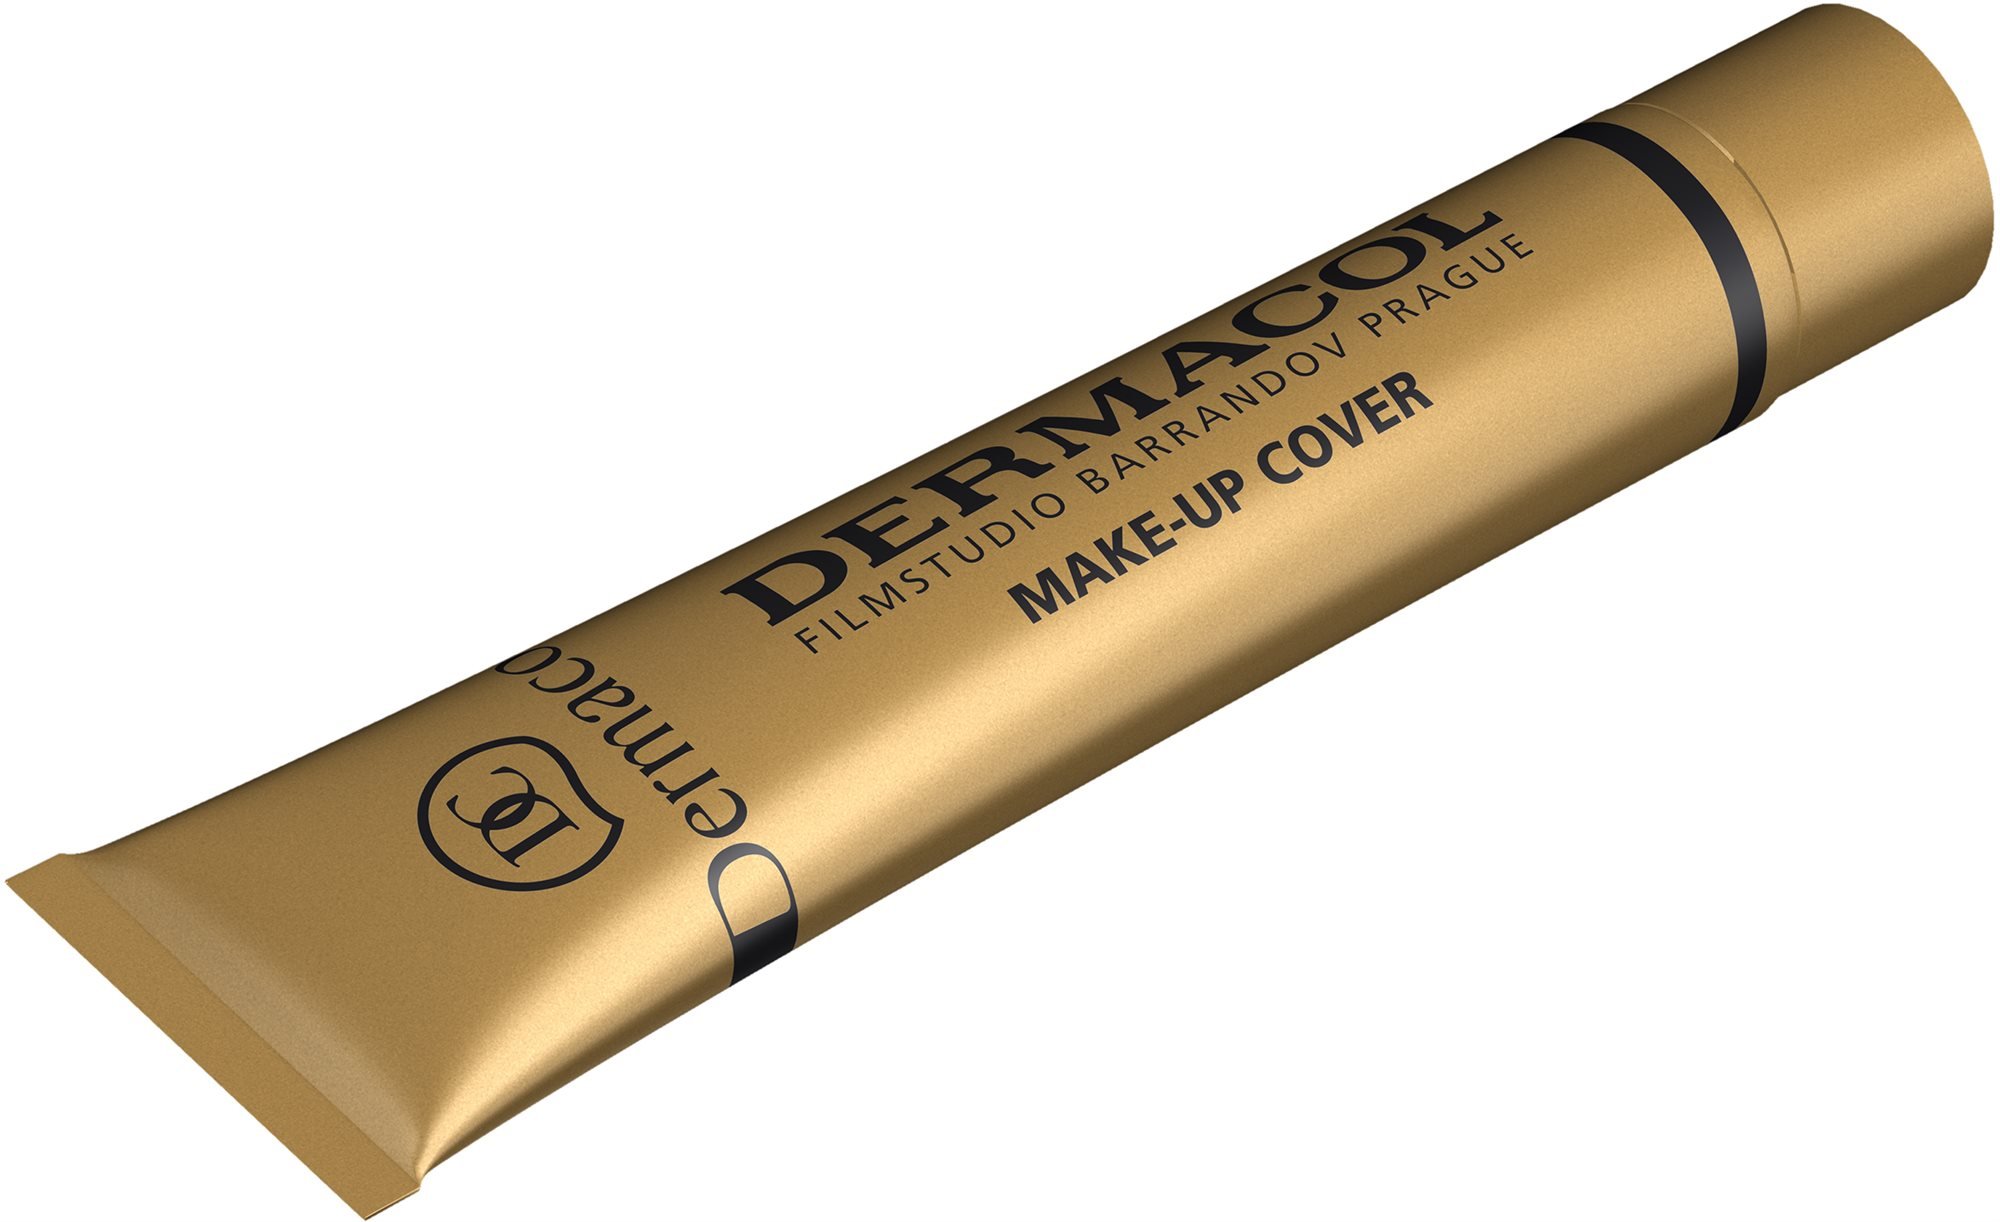 Buy Dermacol Make-up Cover Shade-208 (Foundation Cover All Scars or Tattoos)  Online at Low Prices in India - Amazon.in